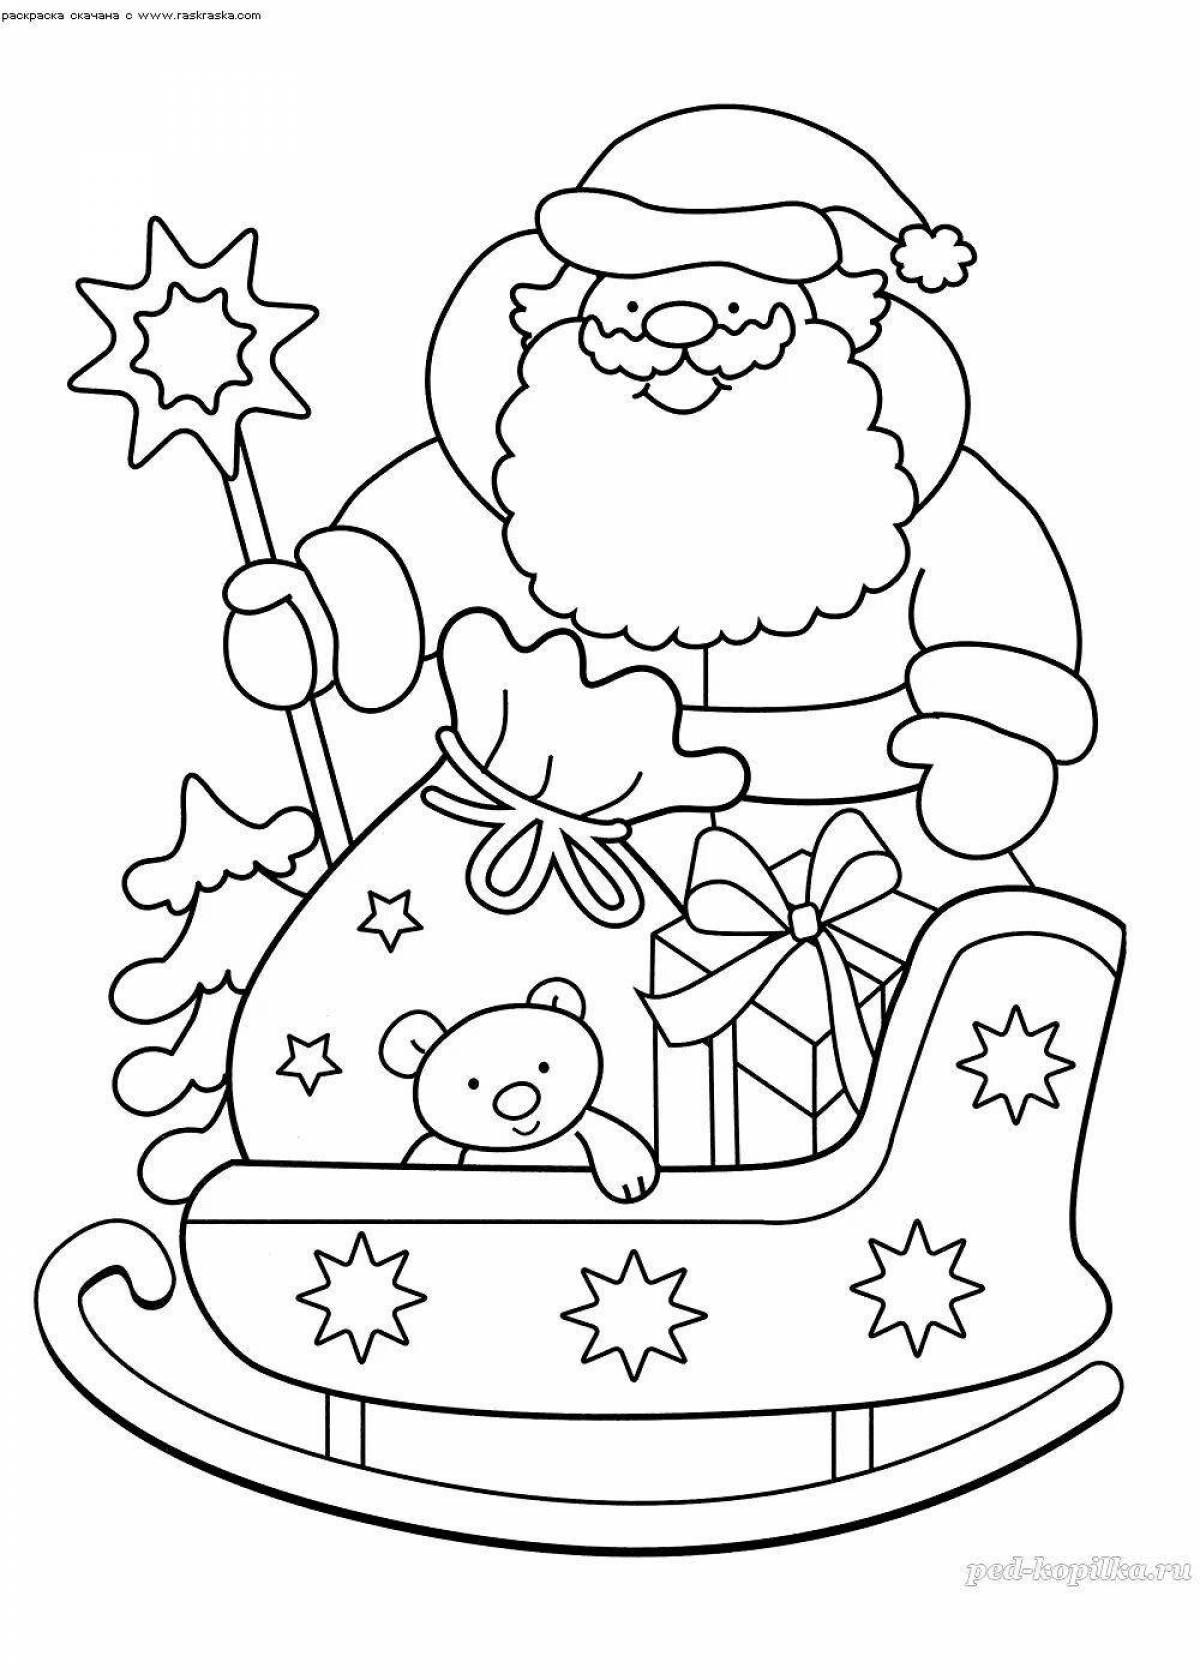 Charming santa claus coloring book for kids